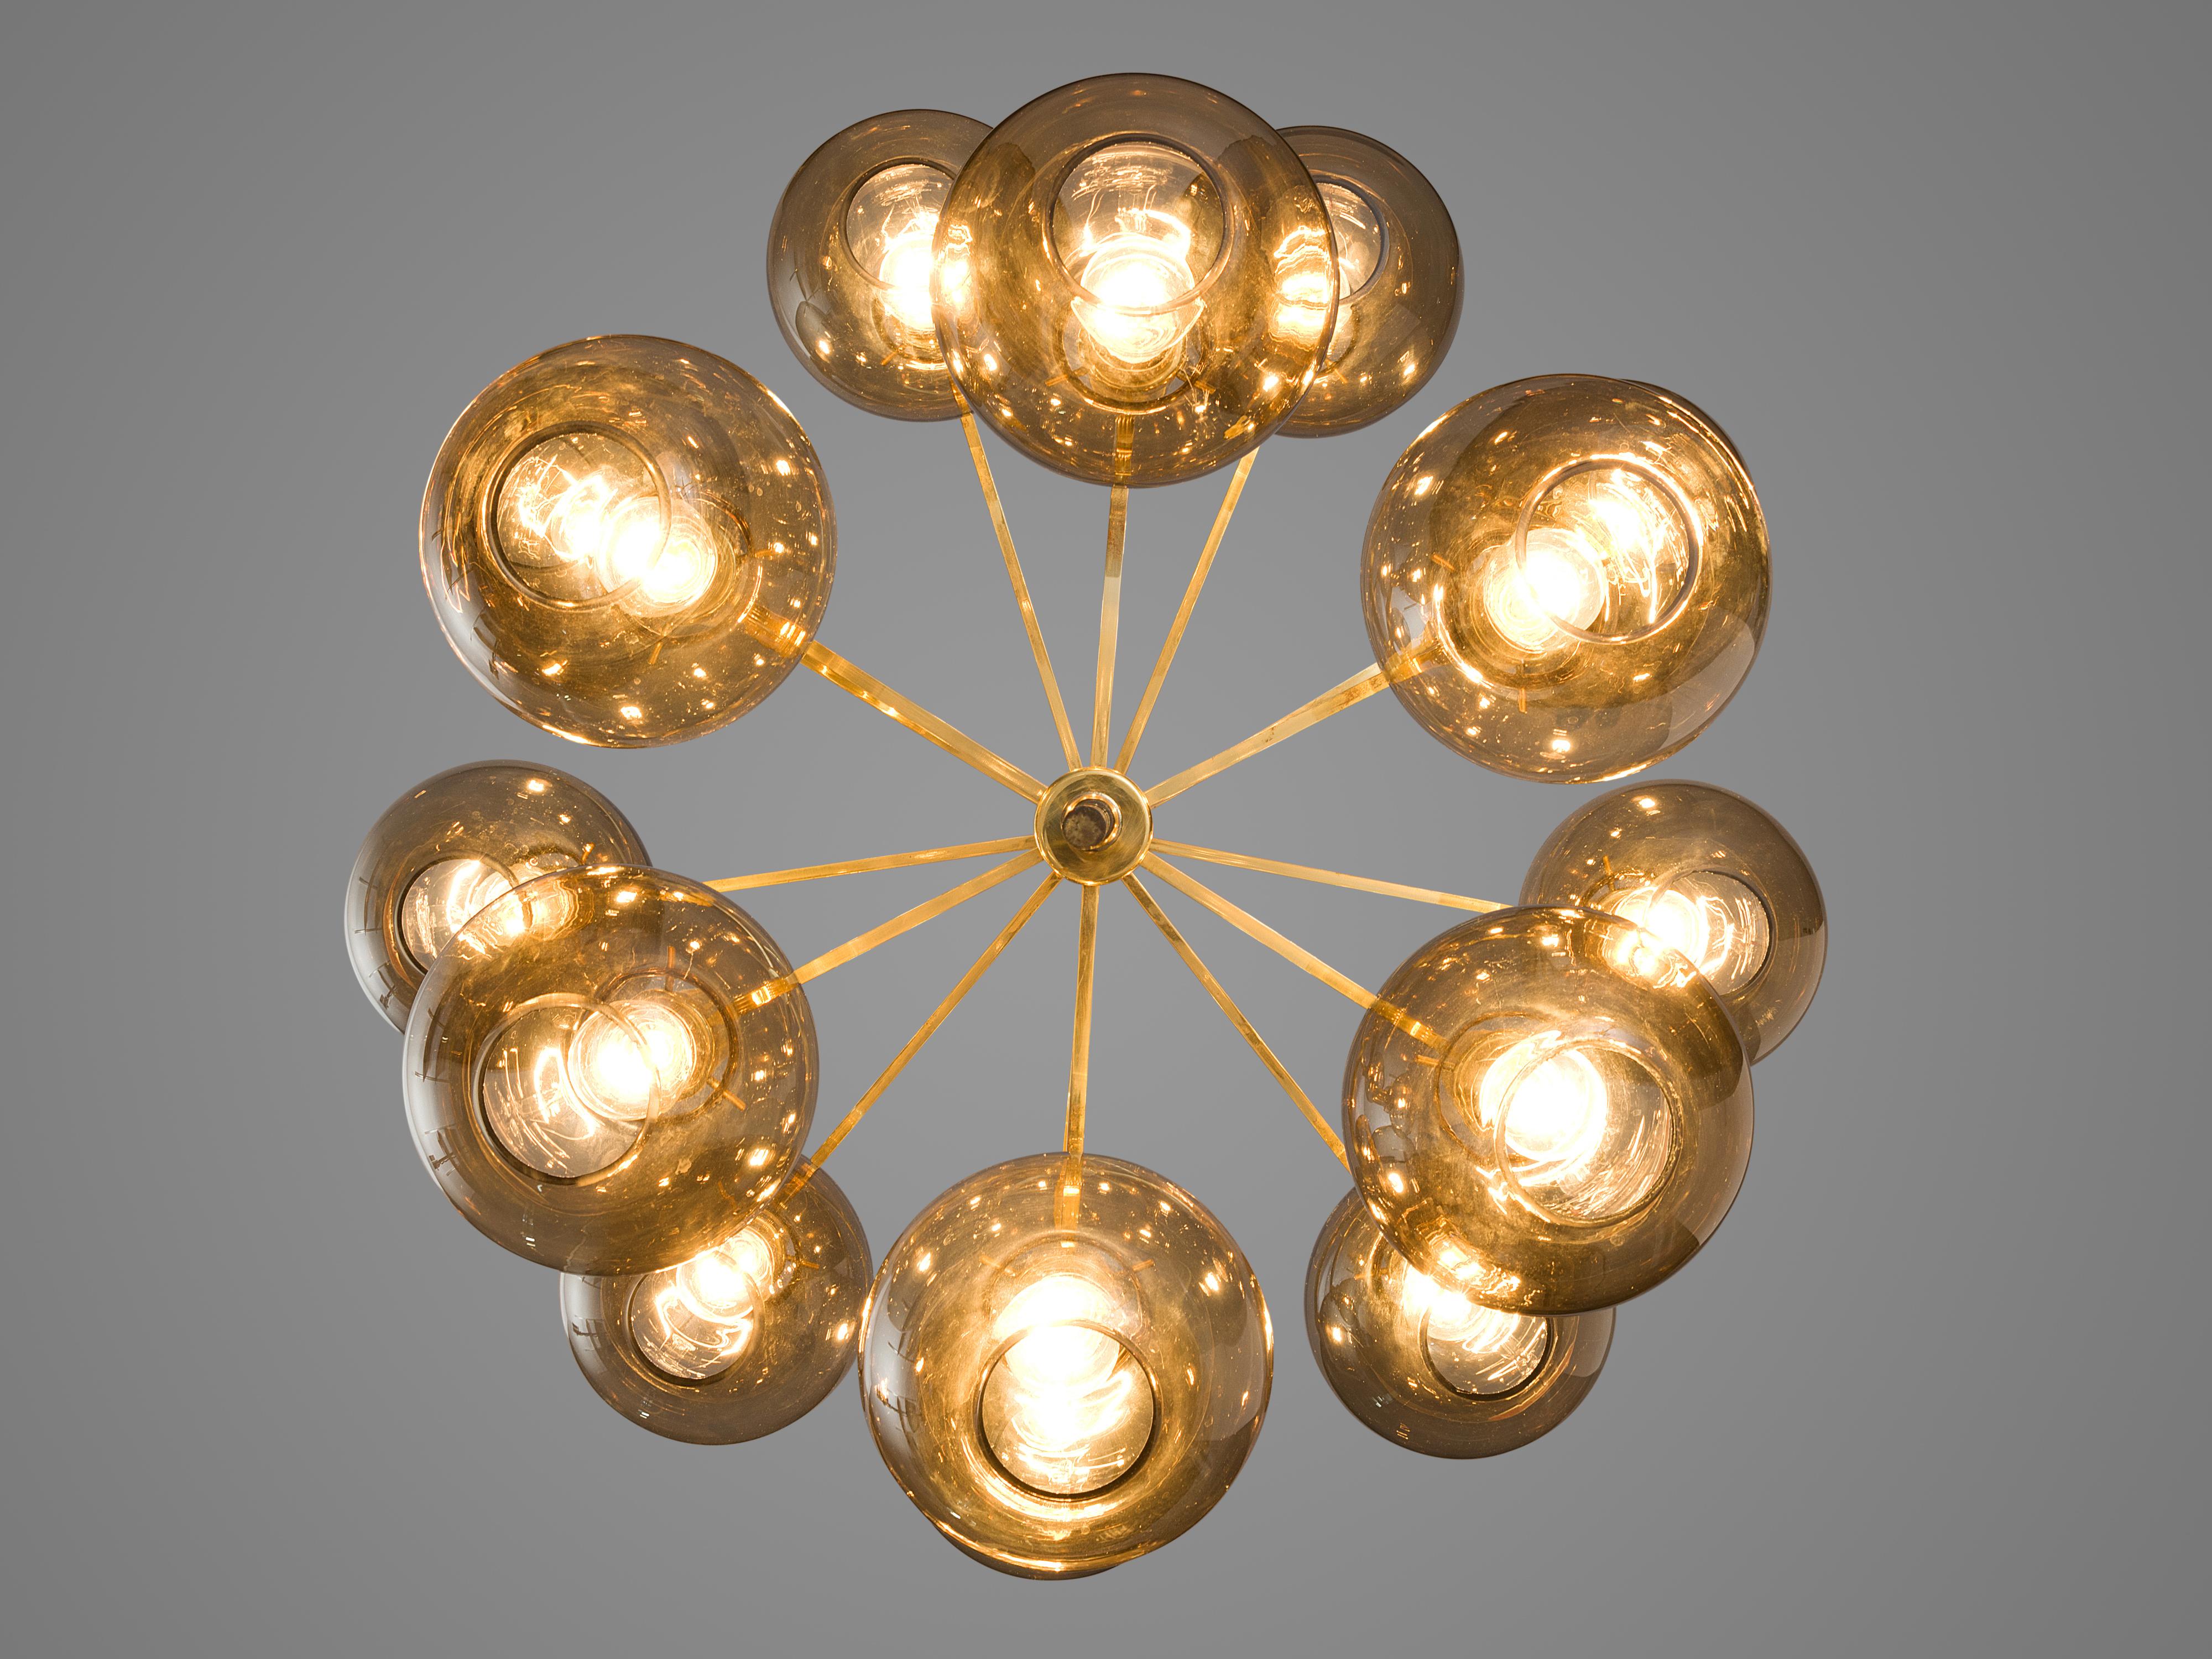 Swedish Hans-Agne Jakobsson ‘Pastoral’ Chandelier with Glass Spheres